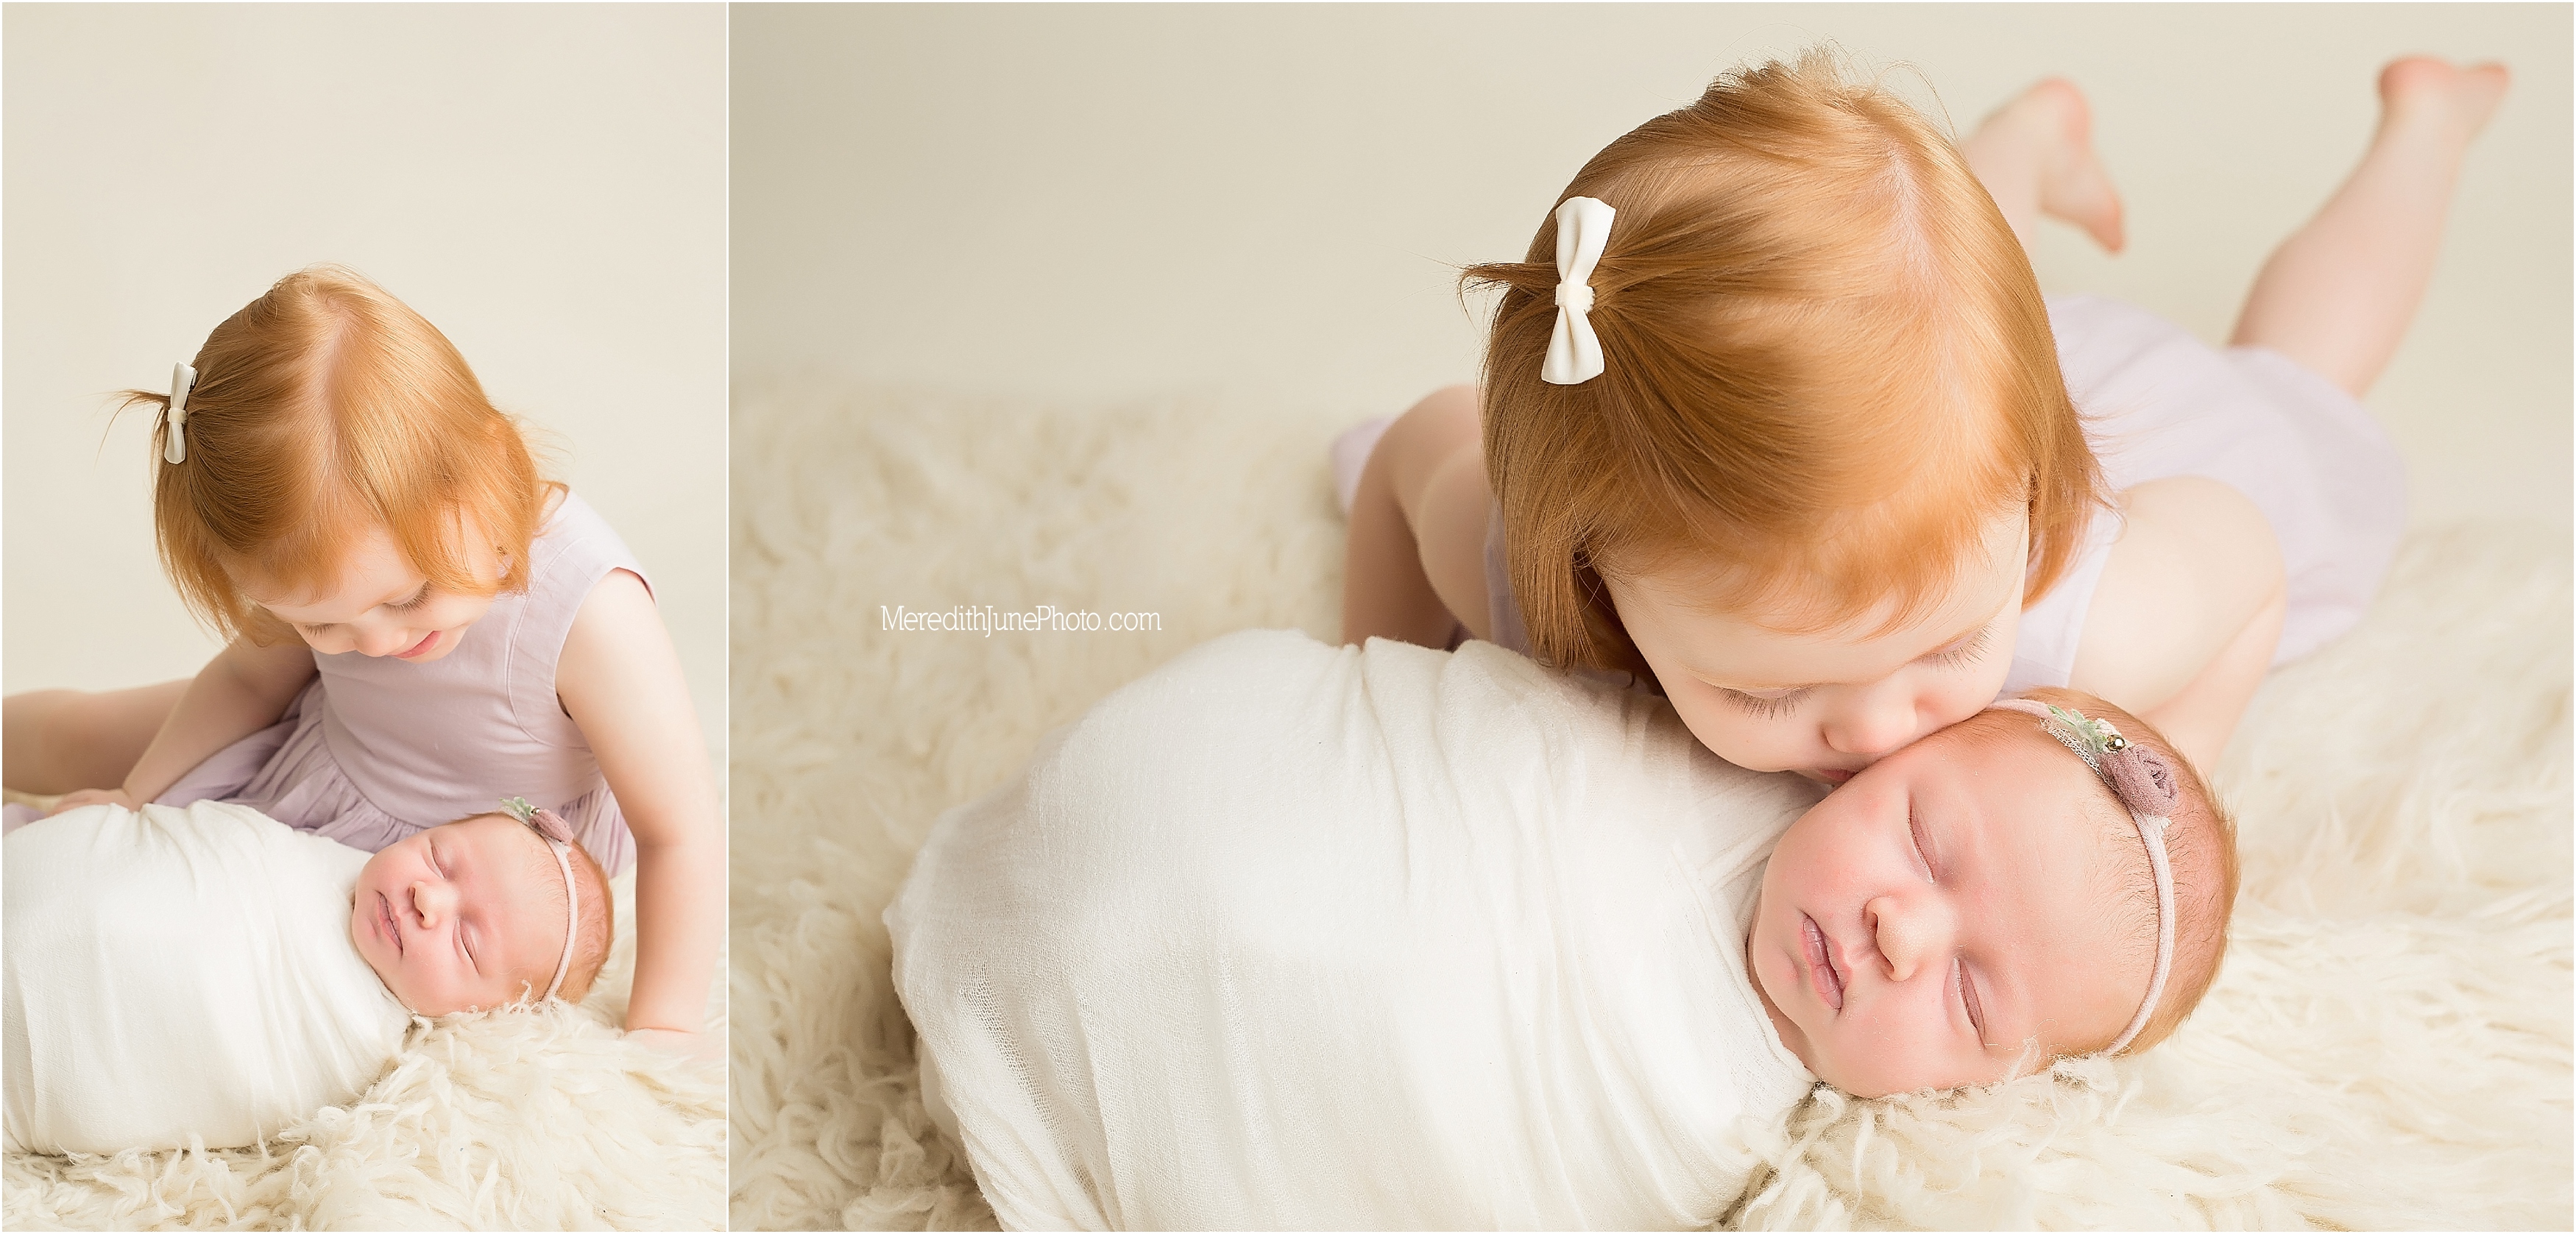 newborn photos with siblings | sibling pose ideas